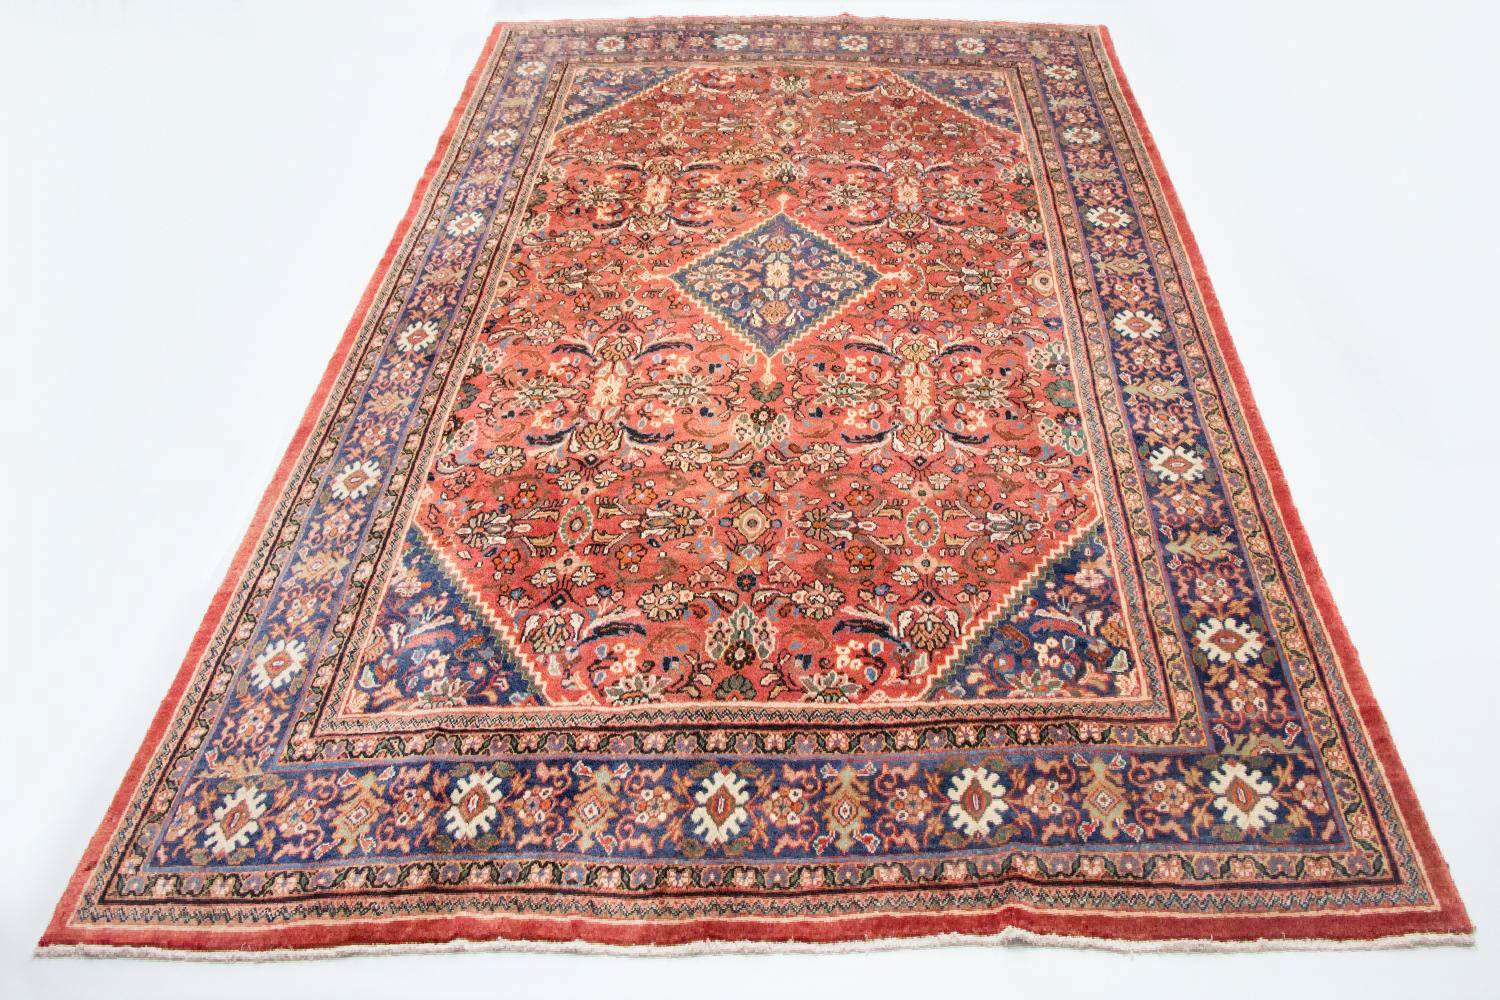 Perser Rug - Classic - 433 x 312 cm - red